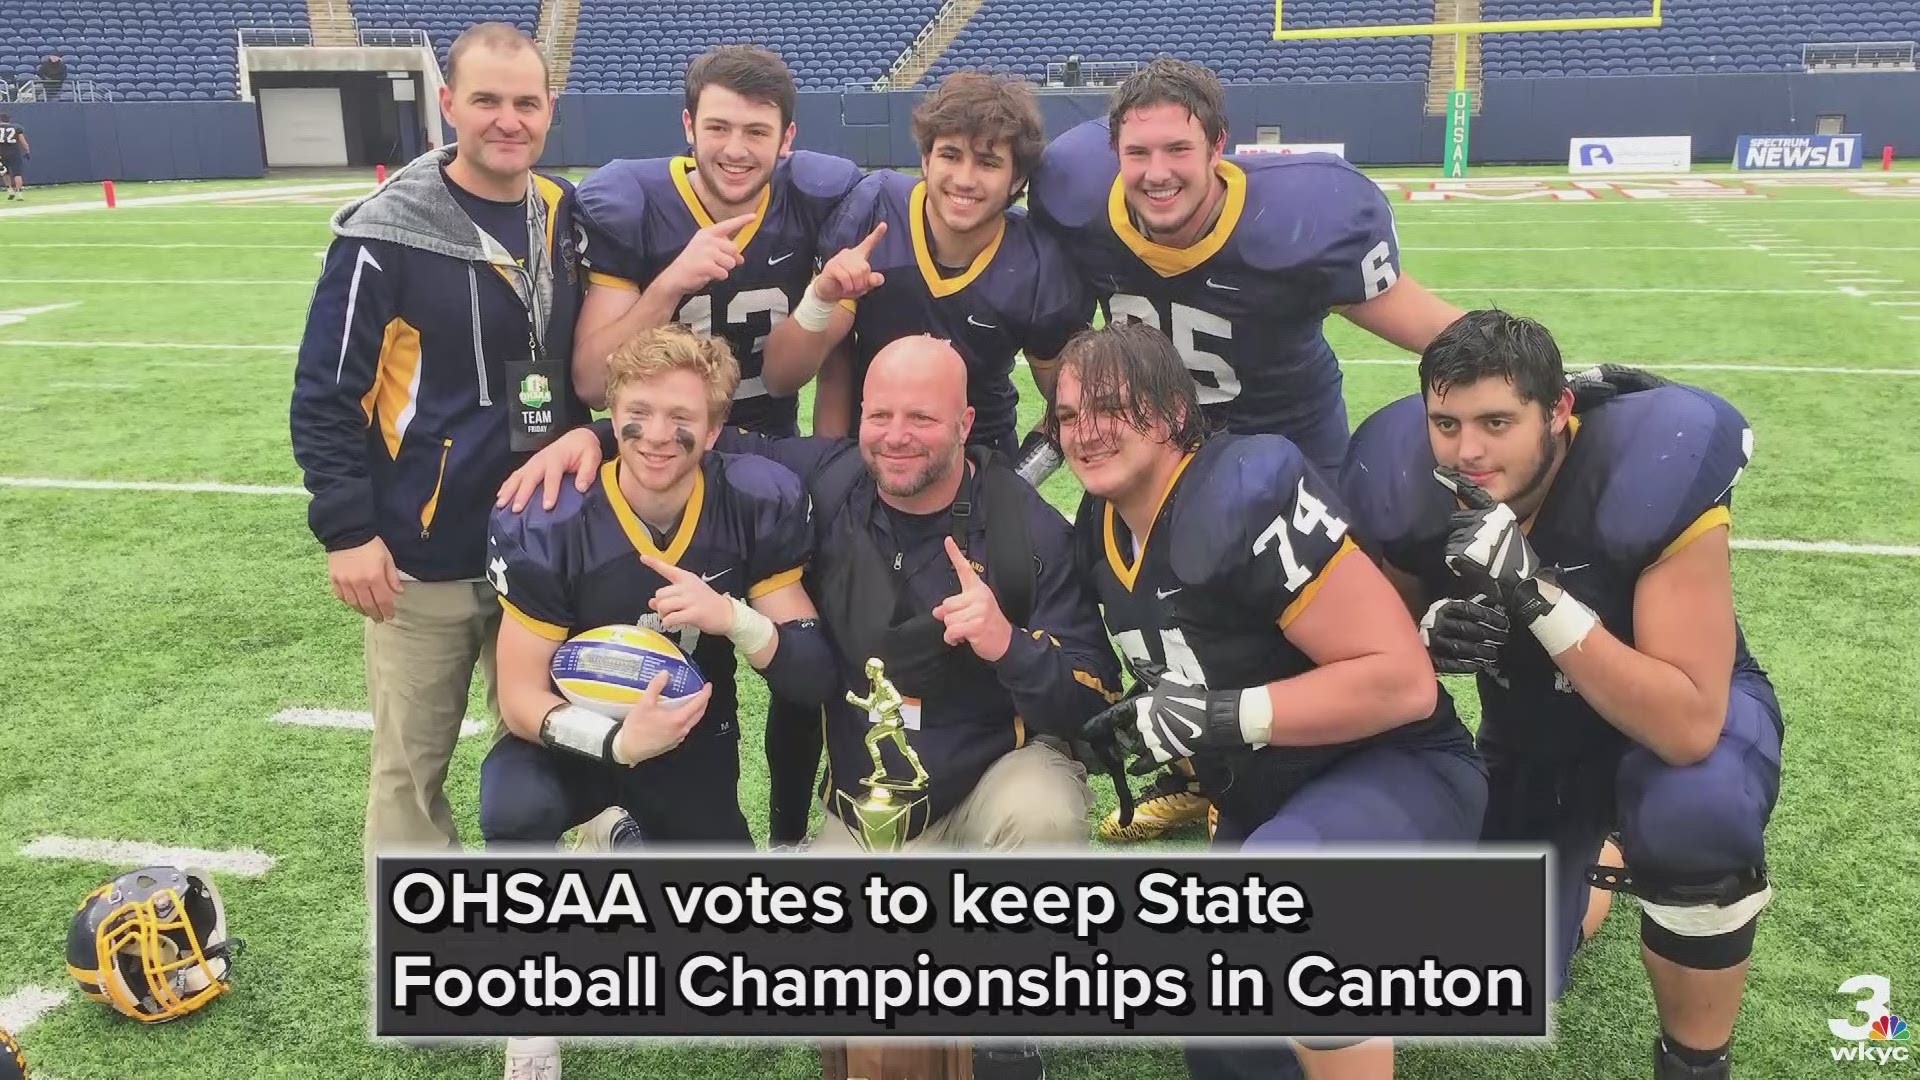 The OHSAA voted unanimously to keep the State Football Championships in Canton and move the state baseball tournament to Akron in 2019.